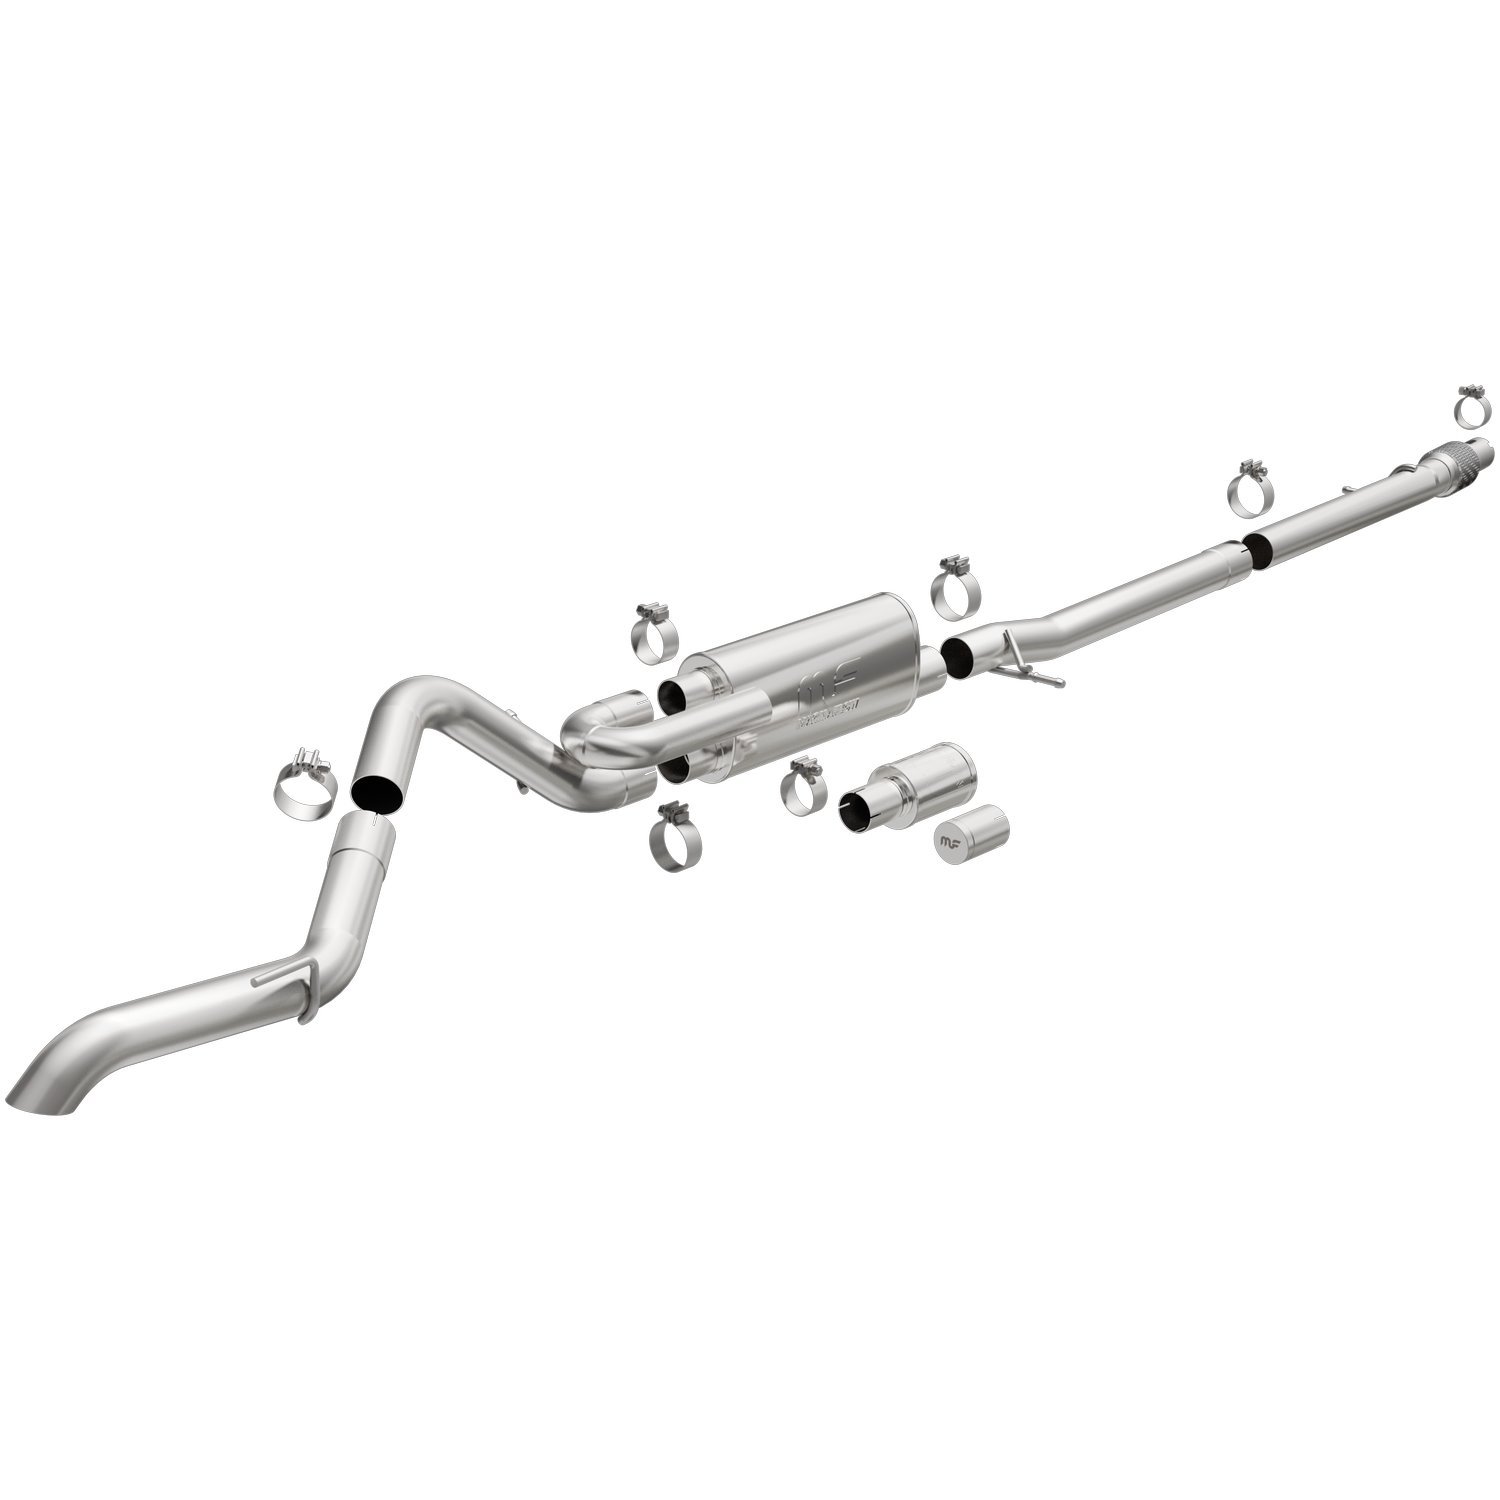 19605 Overland Series Cat-Back Exhaust System fits Select Ford Ranger 2.3L L4